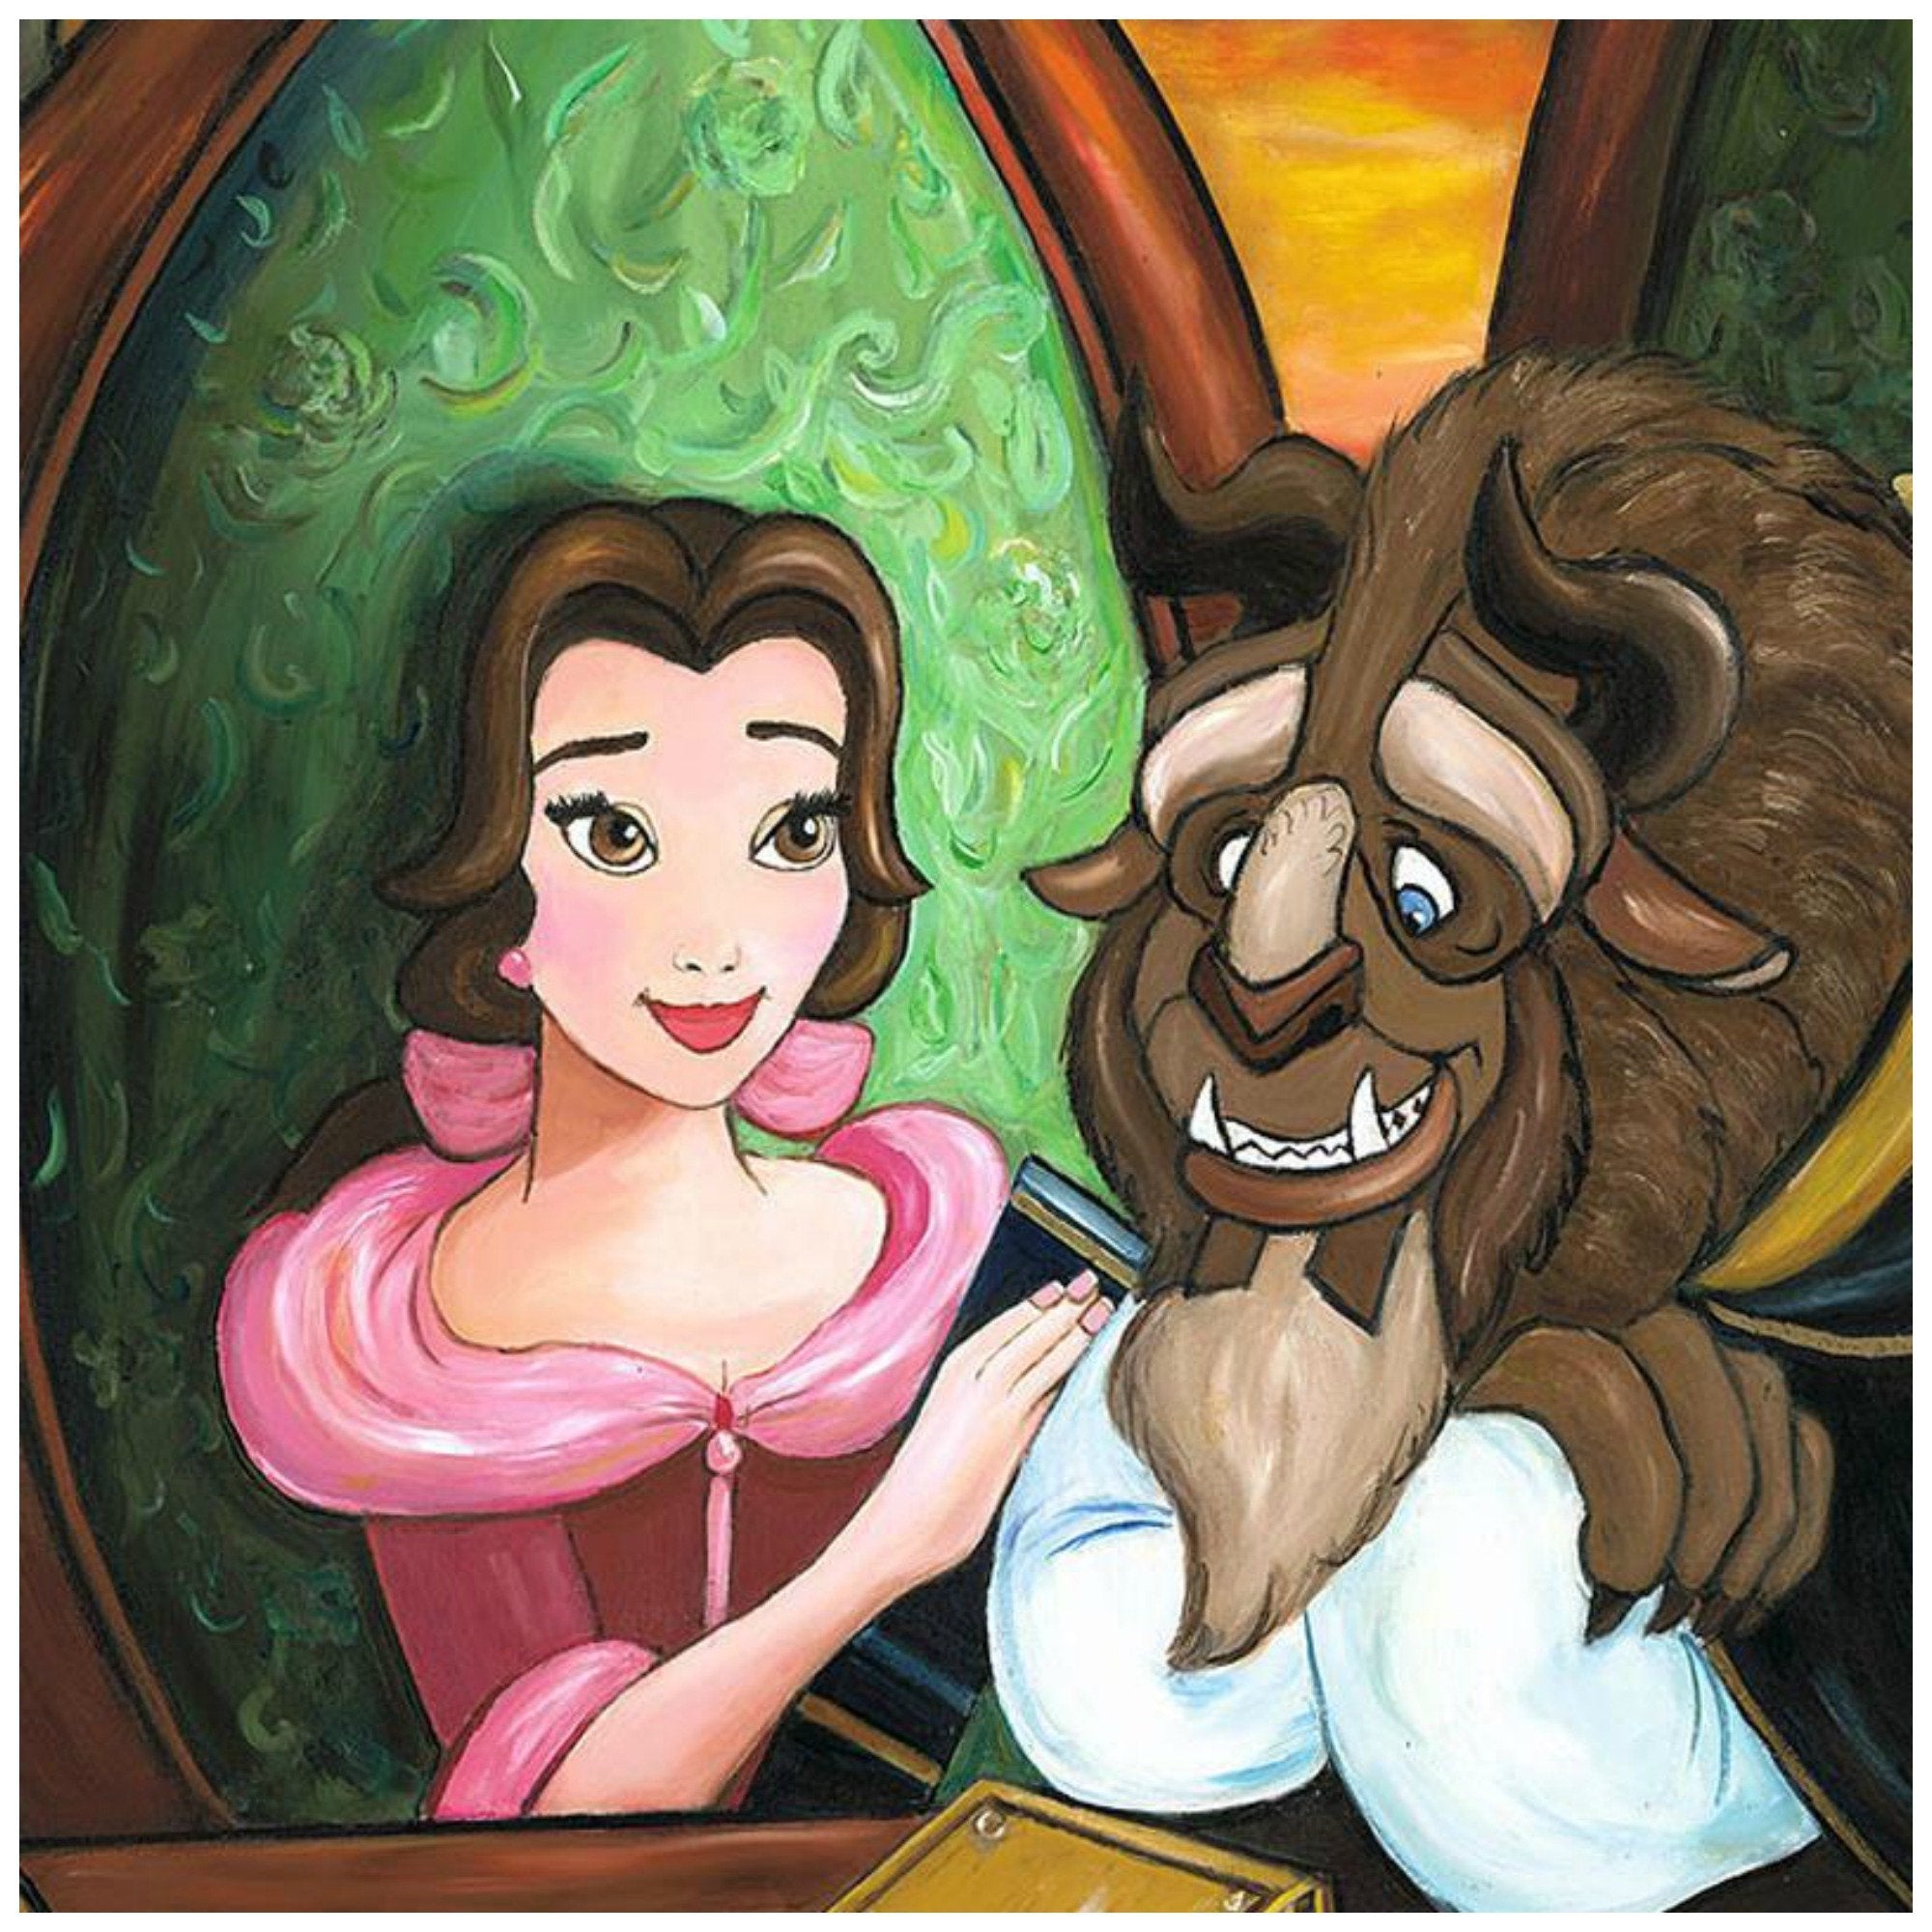 Our Story by Paige O'Hara.  Belle presents the Beast with a book she has written about their romance story - closeup